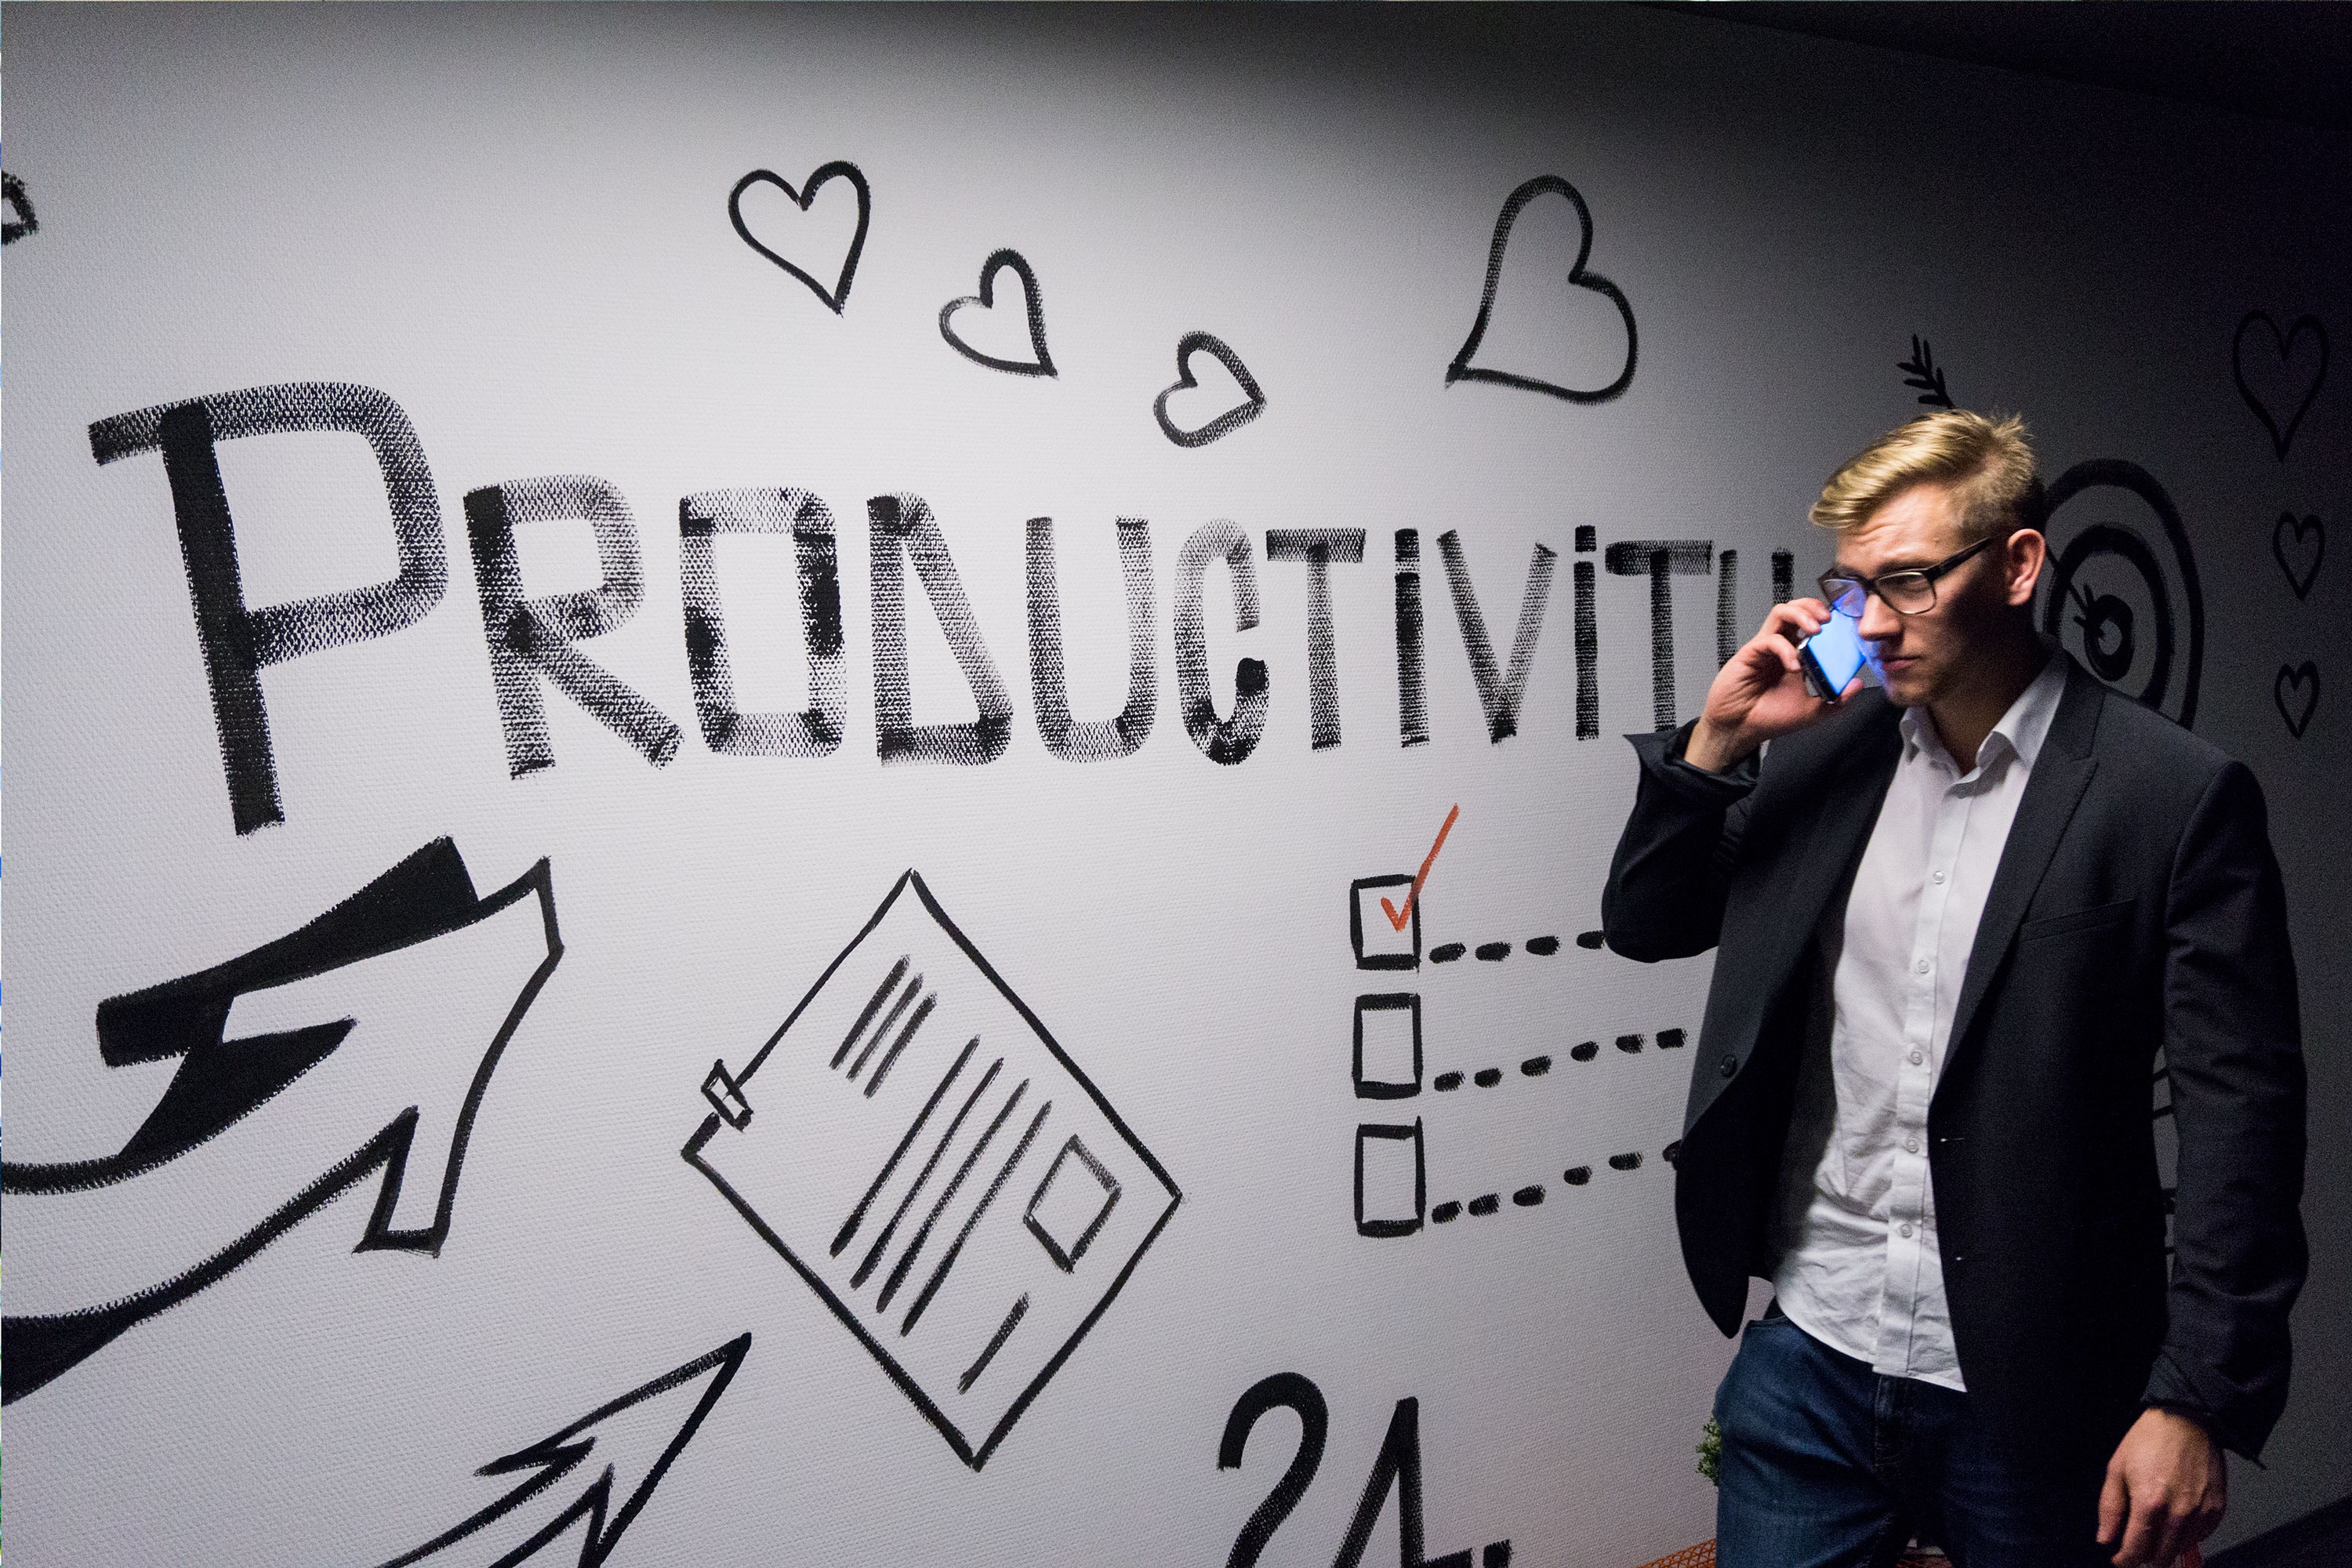 A businessman wearing a suit talks on the phone in front of a wall with "Productivity" painted on it.